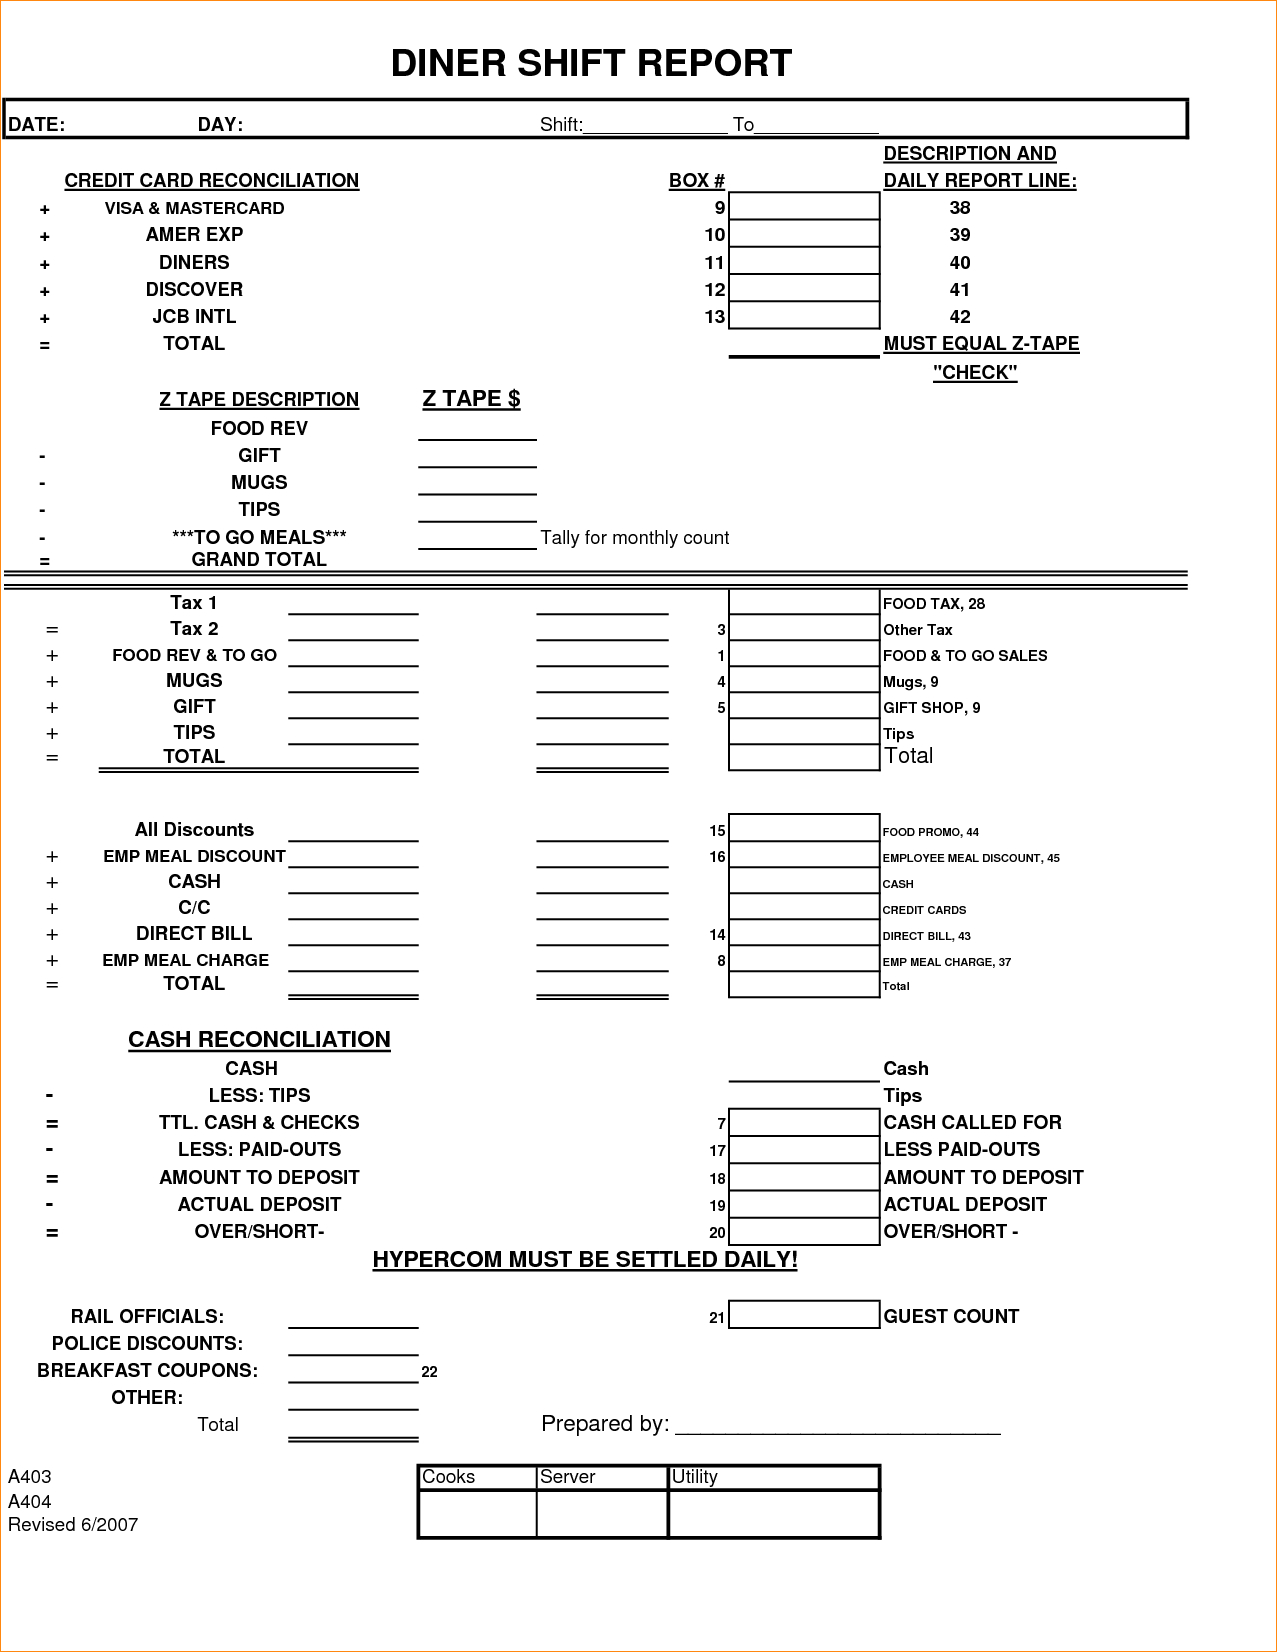 24 Images Of End Shift Report Template Manufacturing Regarding Shift Report Template